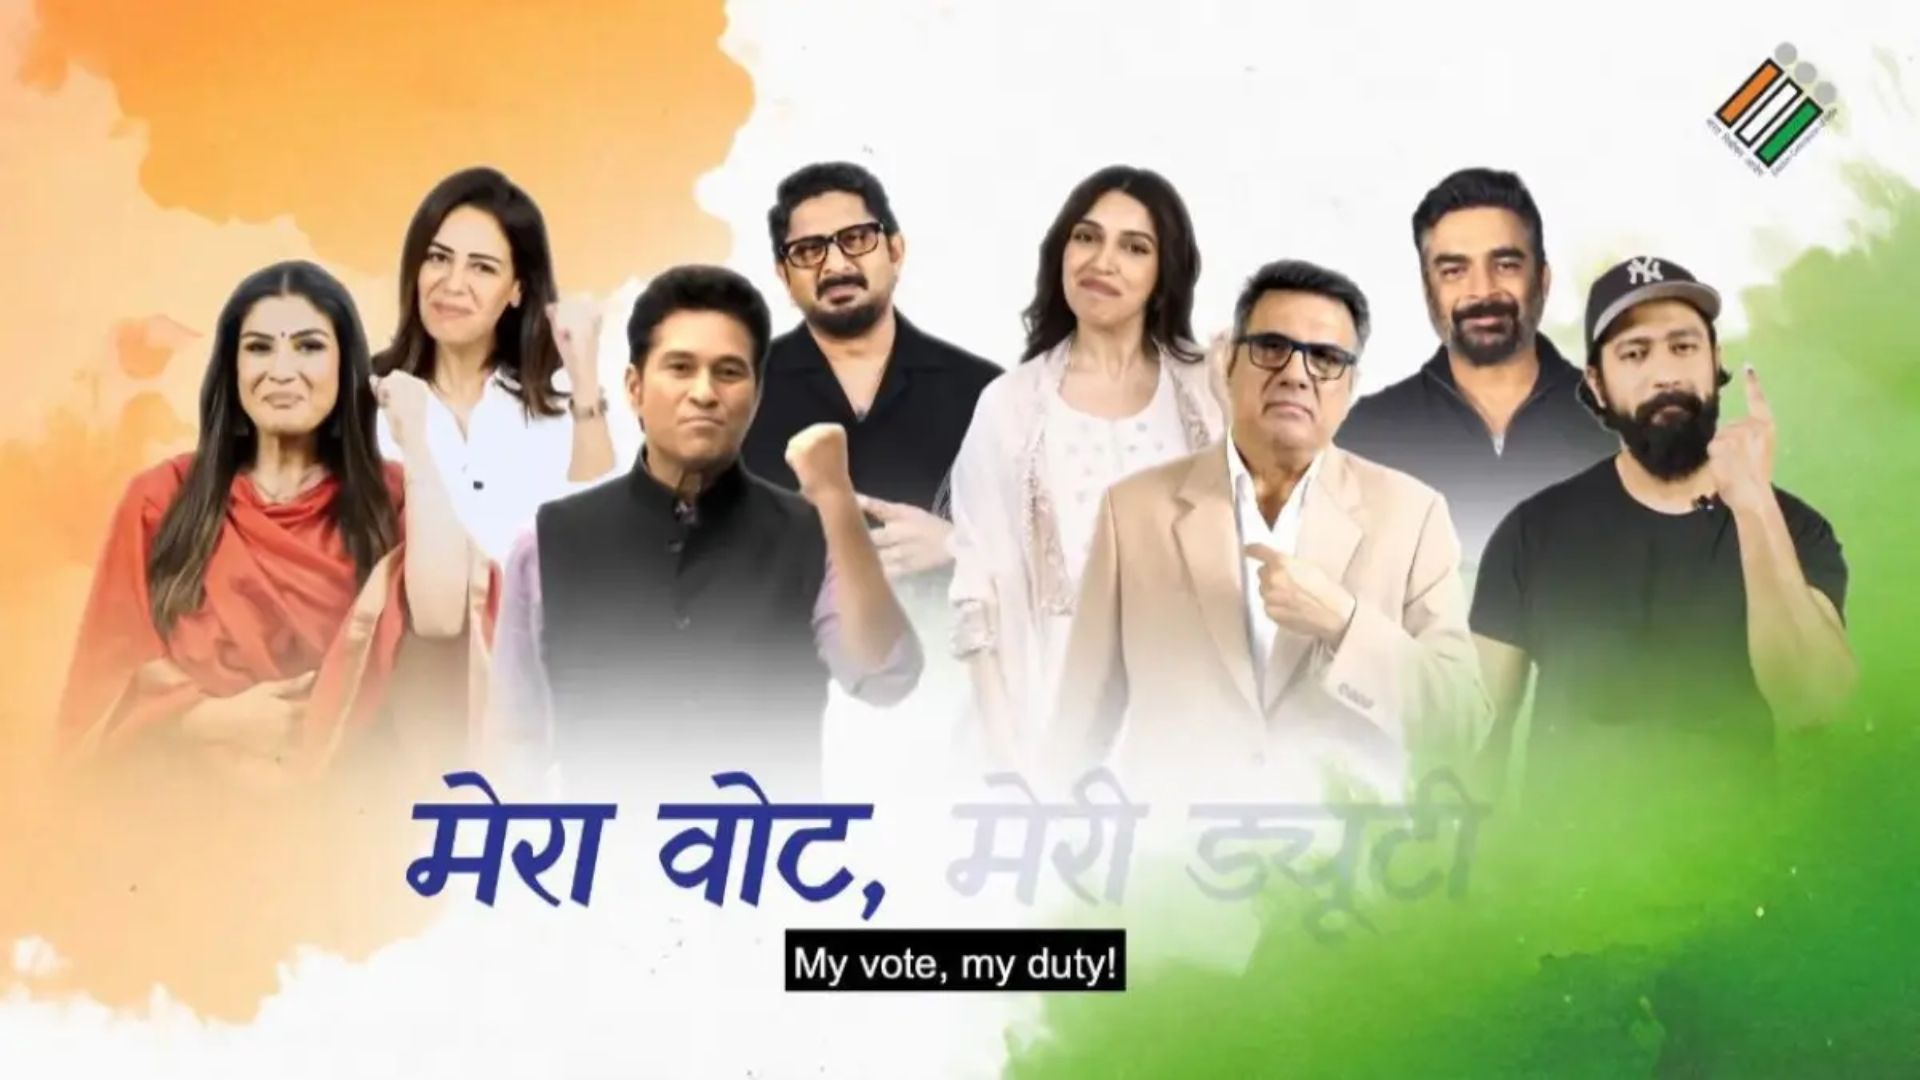 Hirani’s Voter Awareness Film ‘My Vote, My Duty’ Features Star-Studded Messages